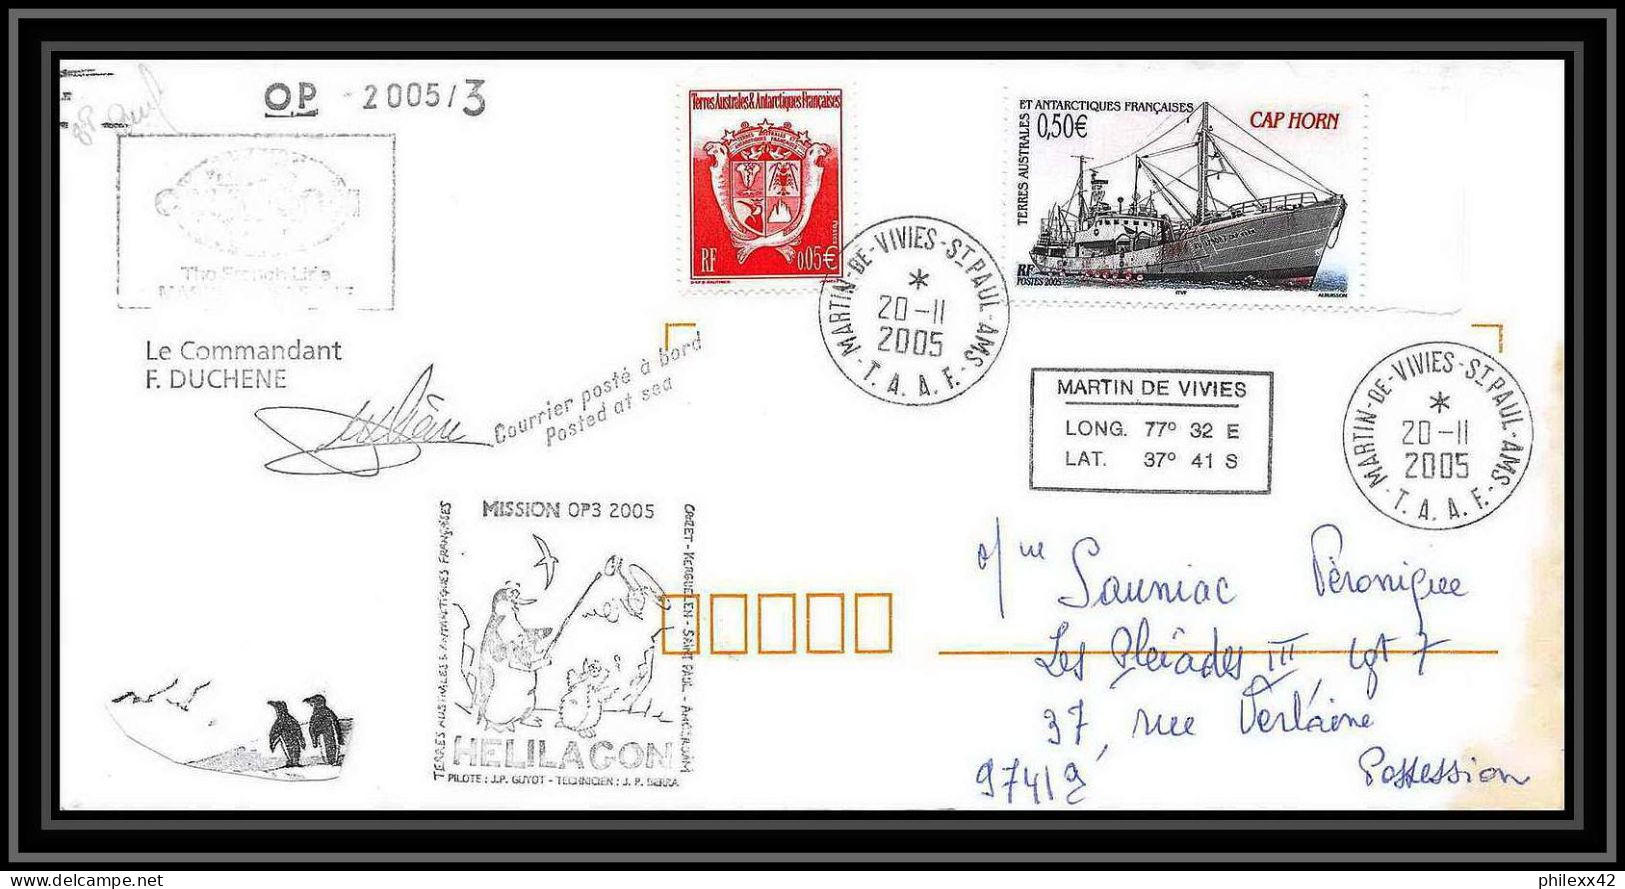 2538 ANTARCTIC Terres Australes TAAF Lettre Cover Dufresne 2 Signé Signed Op 2005/3 KERGUELEN 20/11/2005 N°407 Helilagon - Helicopters